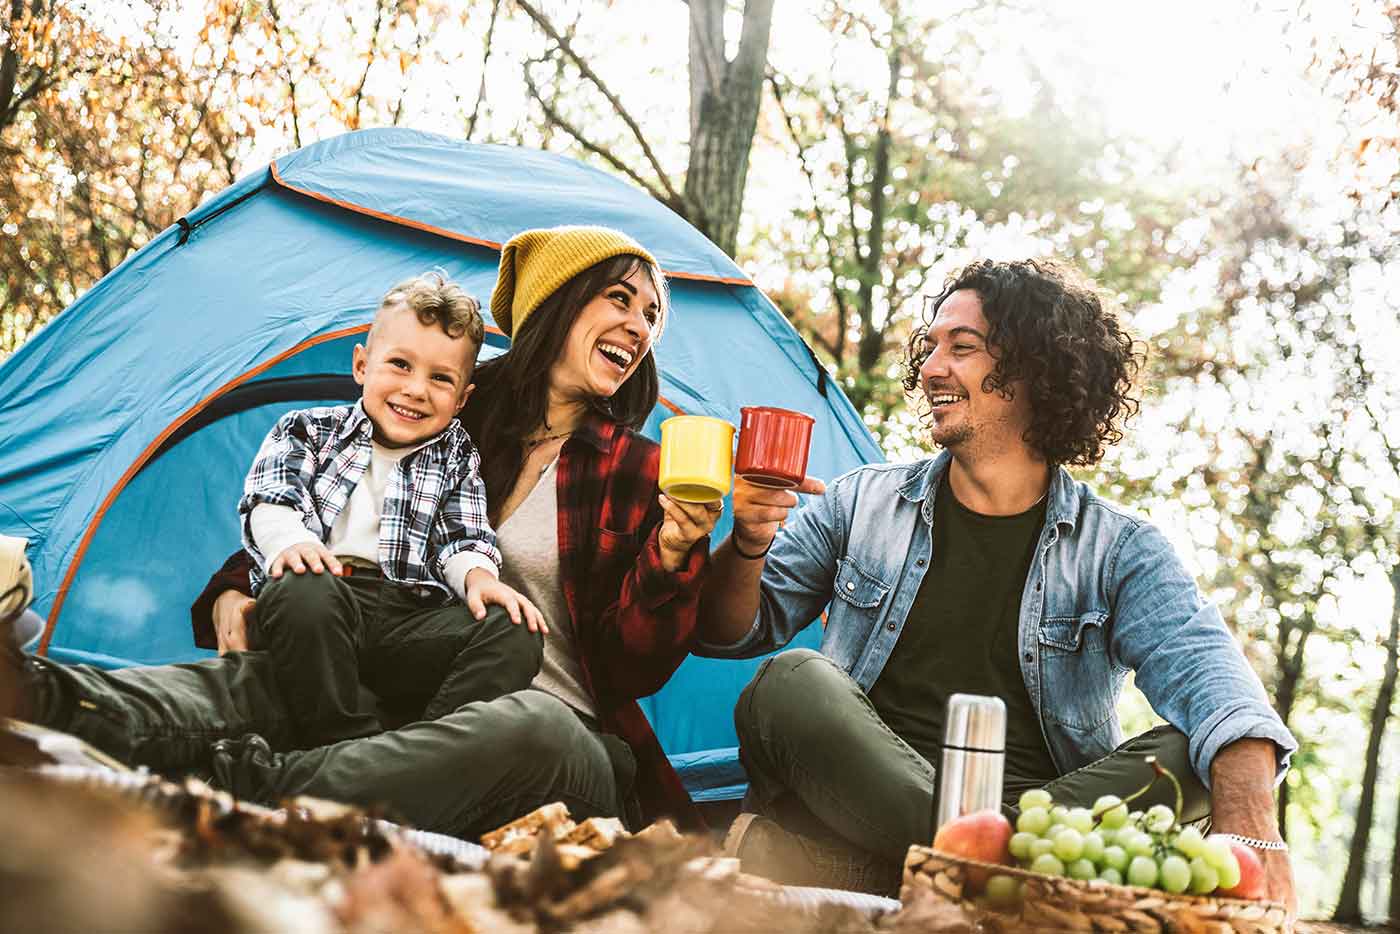 Make Your Next Holiday a Camping & Exercise Adventure: Here’s How